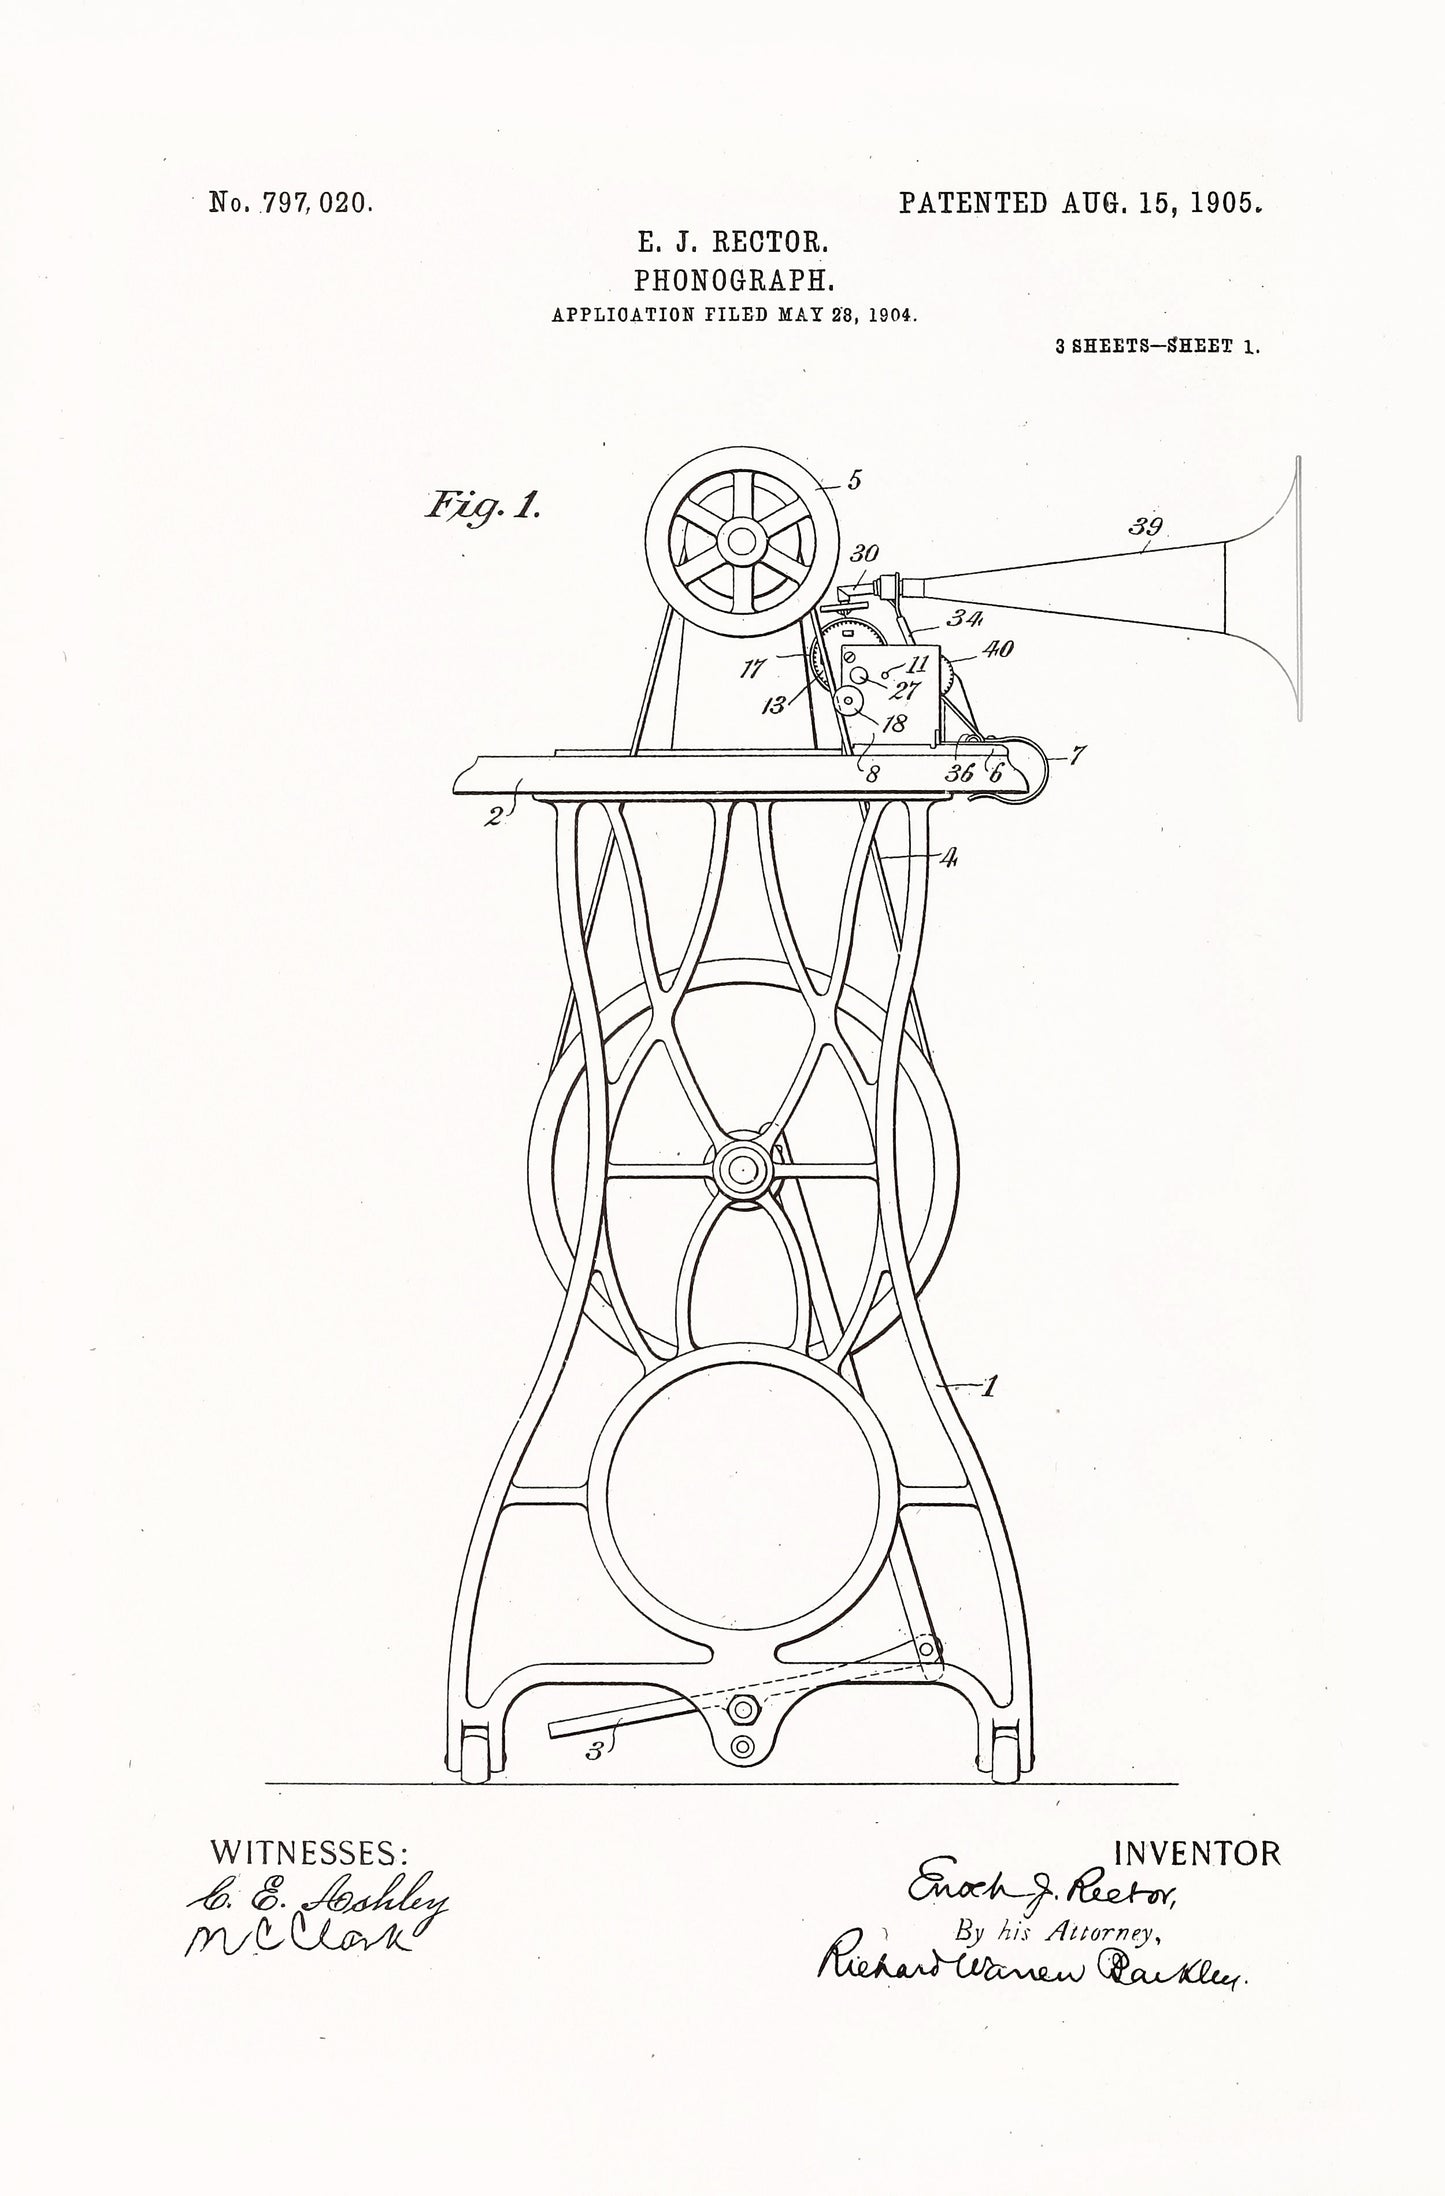 Graphophone Record Player Patents Set 3 [75 Images]